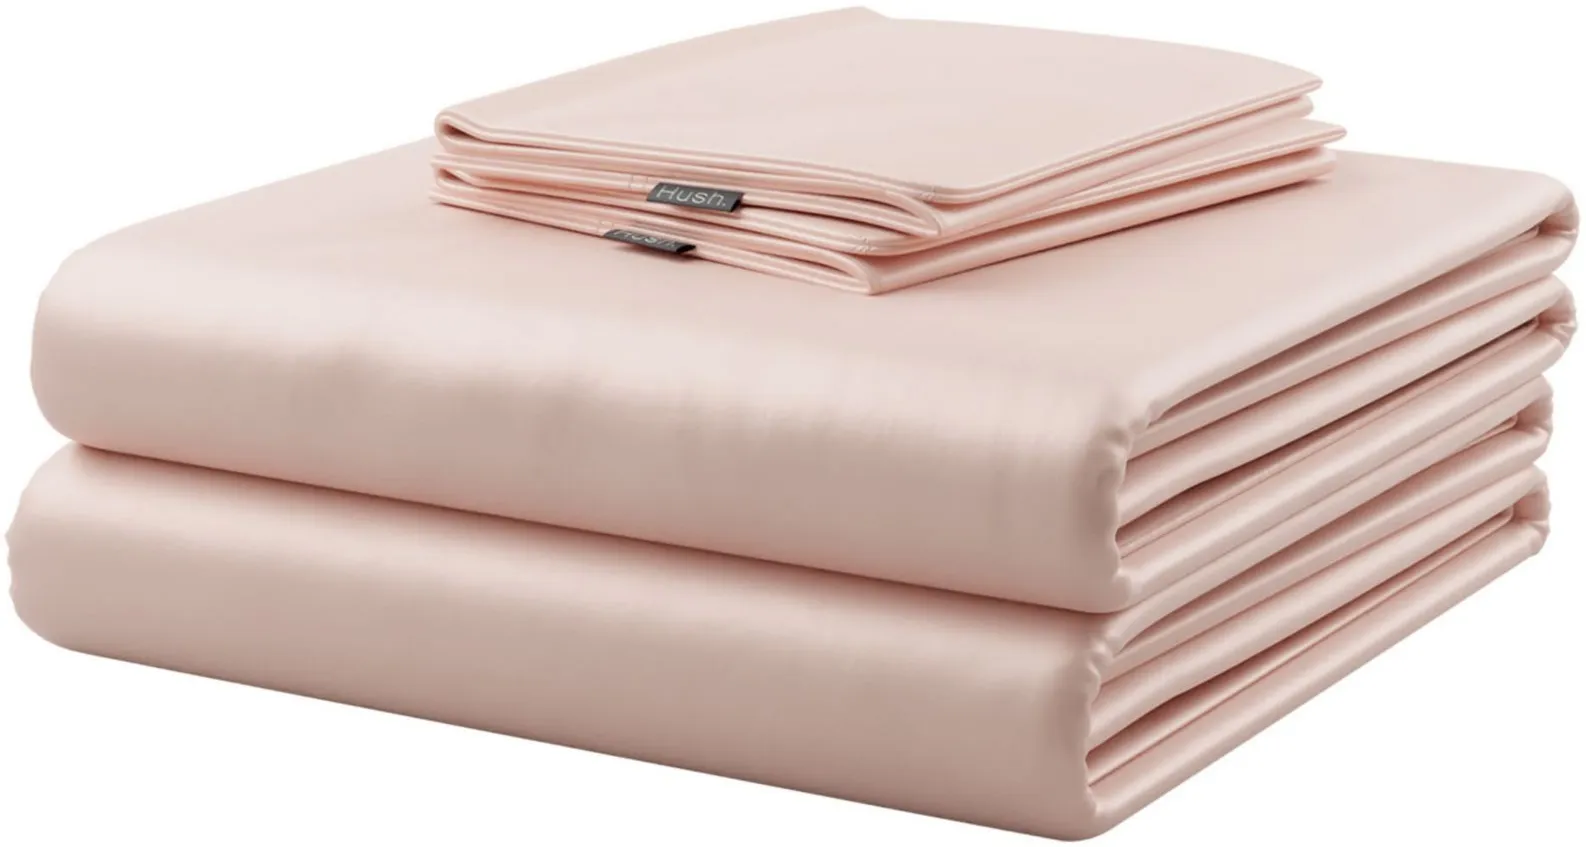 Hush Iced Cooling Sheet and Pillowcase Set in Blush by Hush Blankets